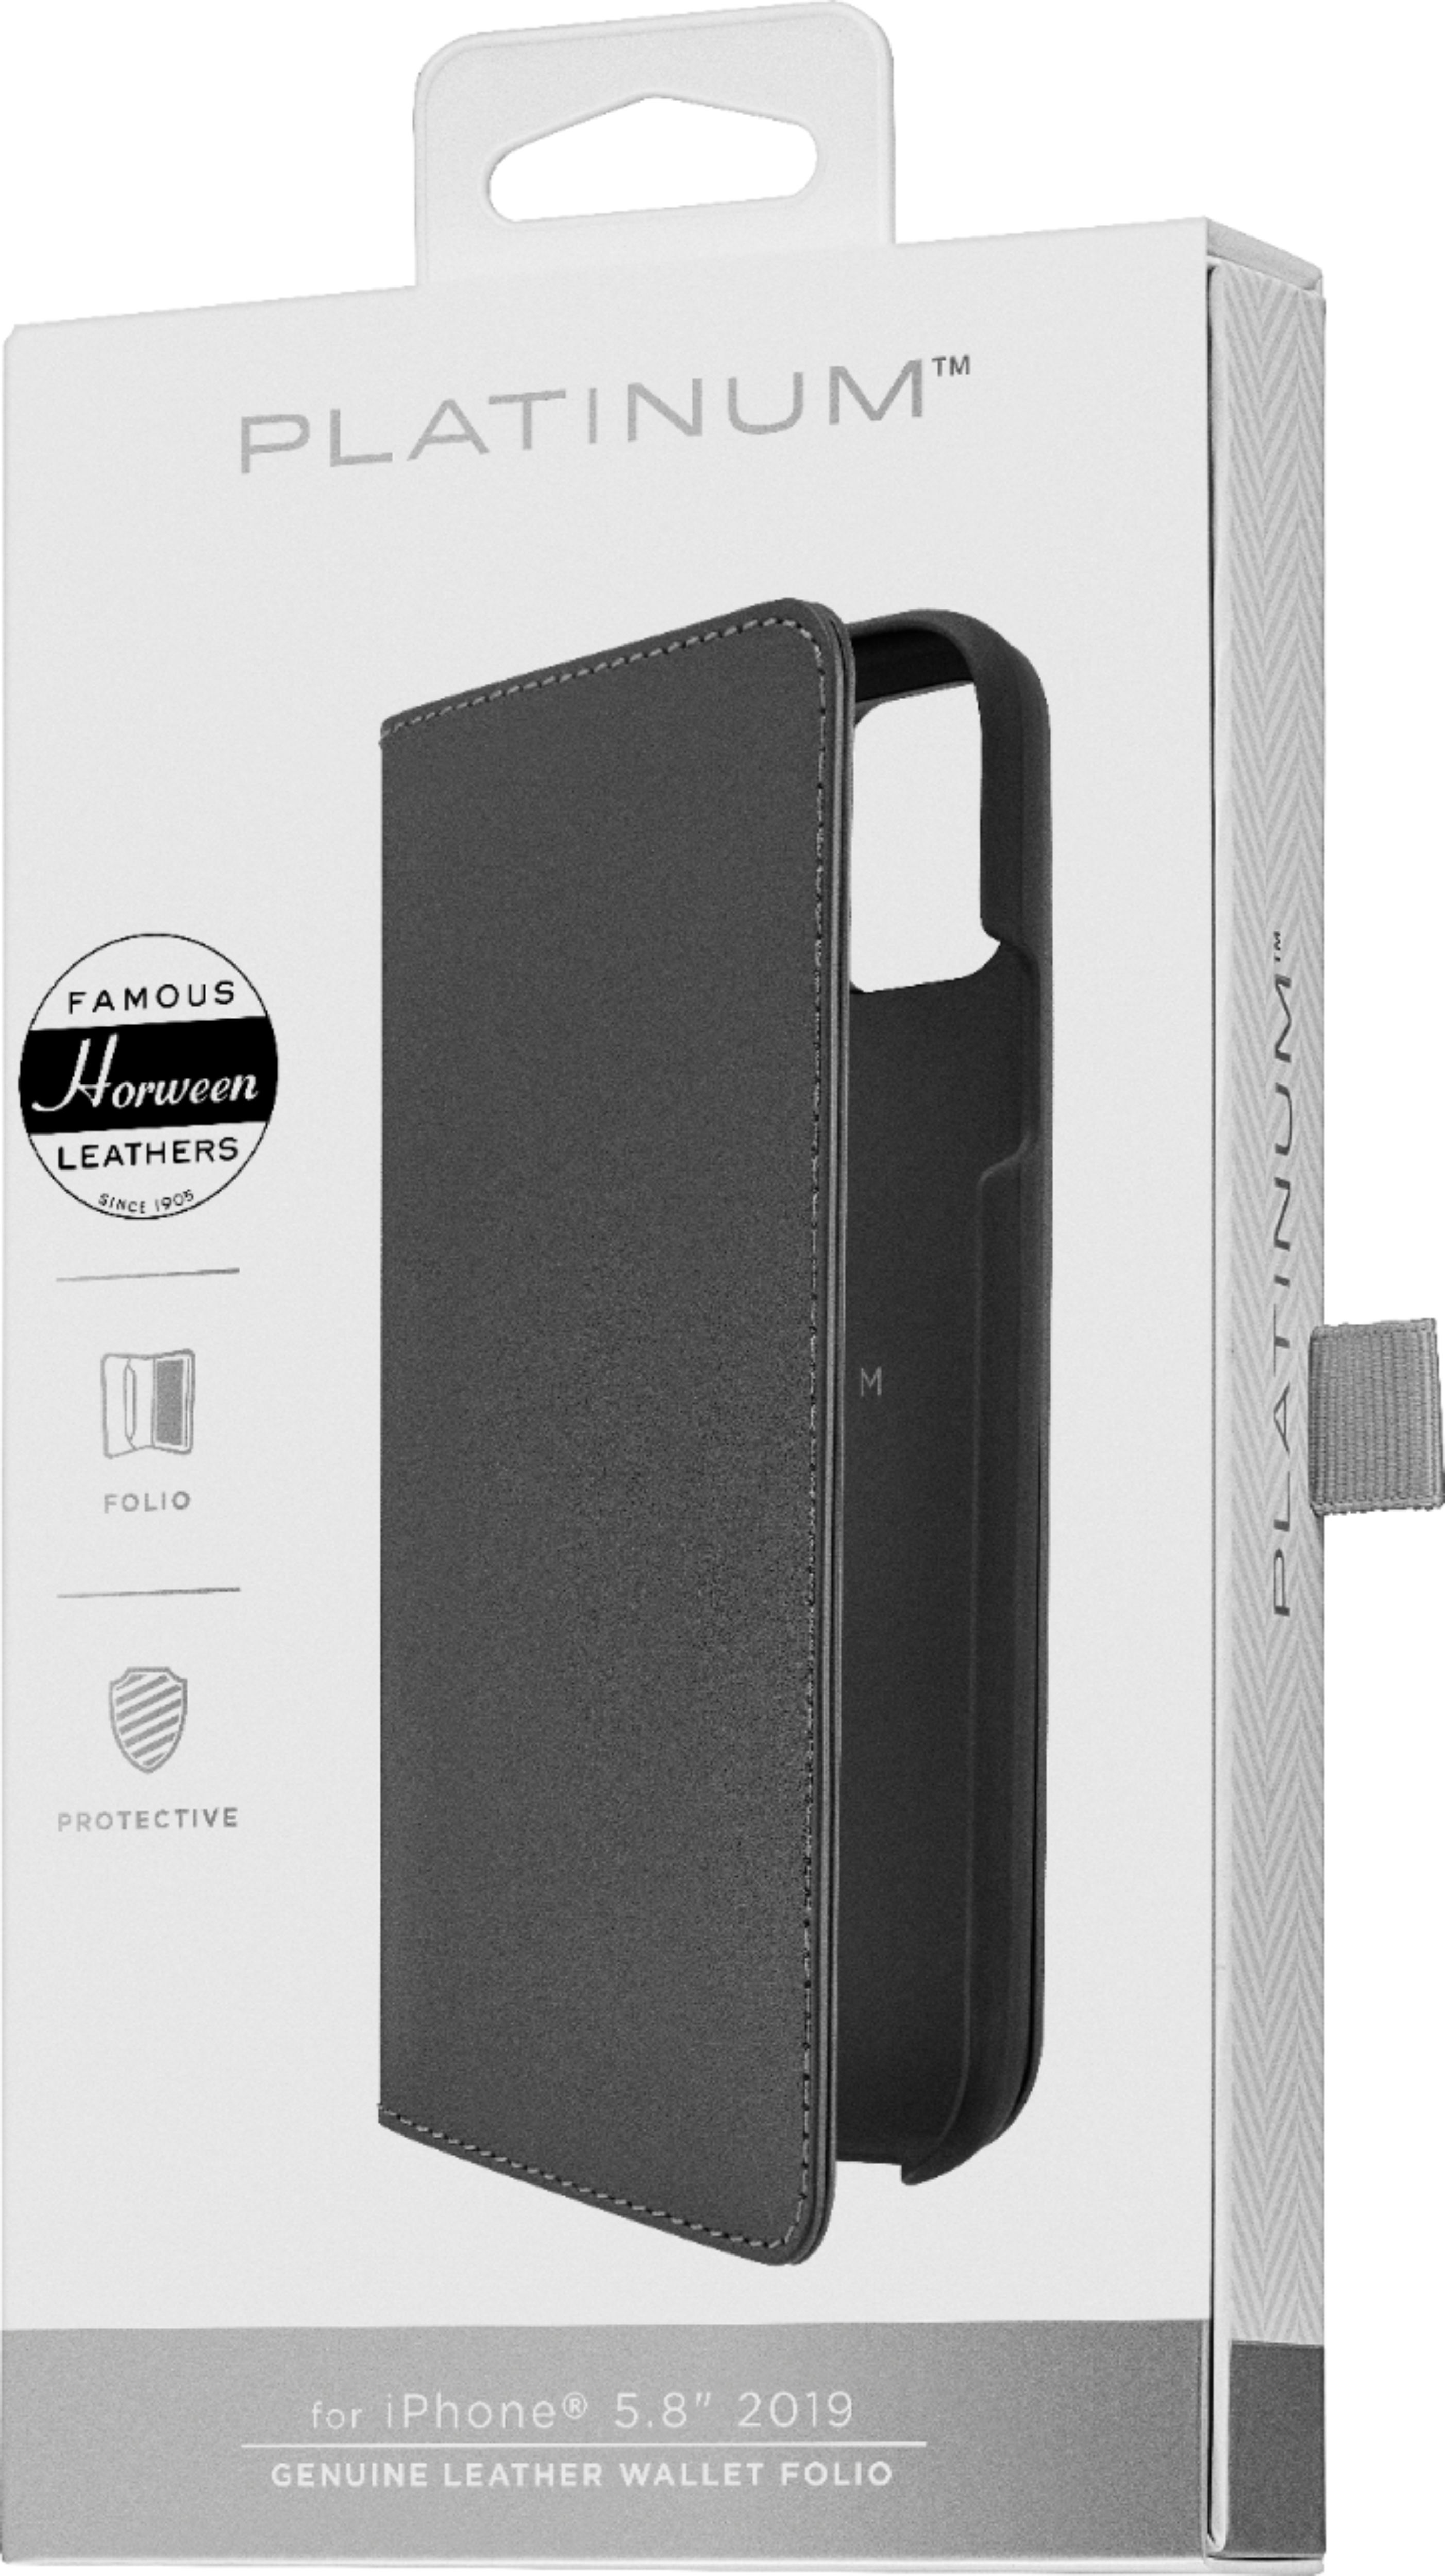 Official Apple iPhone 11 Pro Max Leather Folio Case Review 